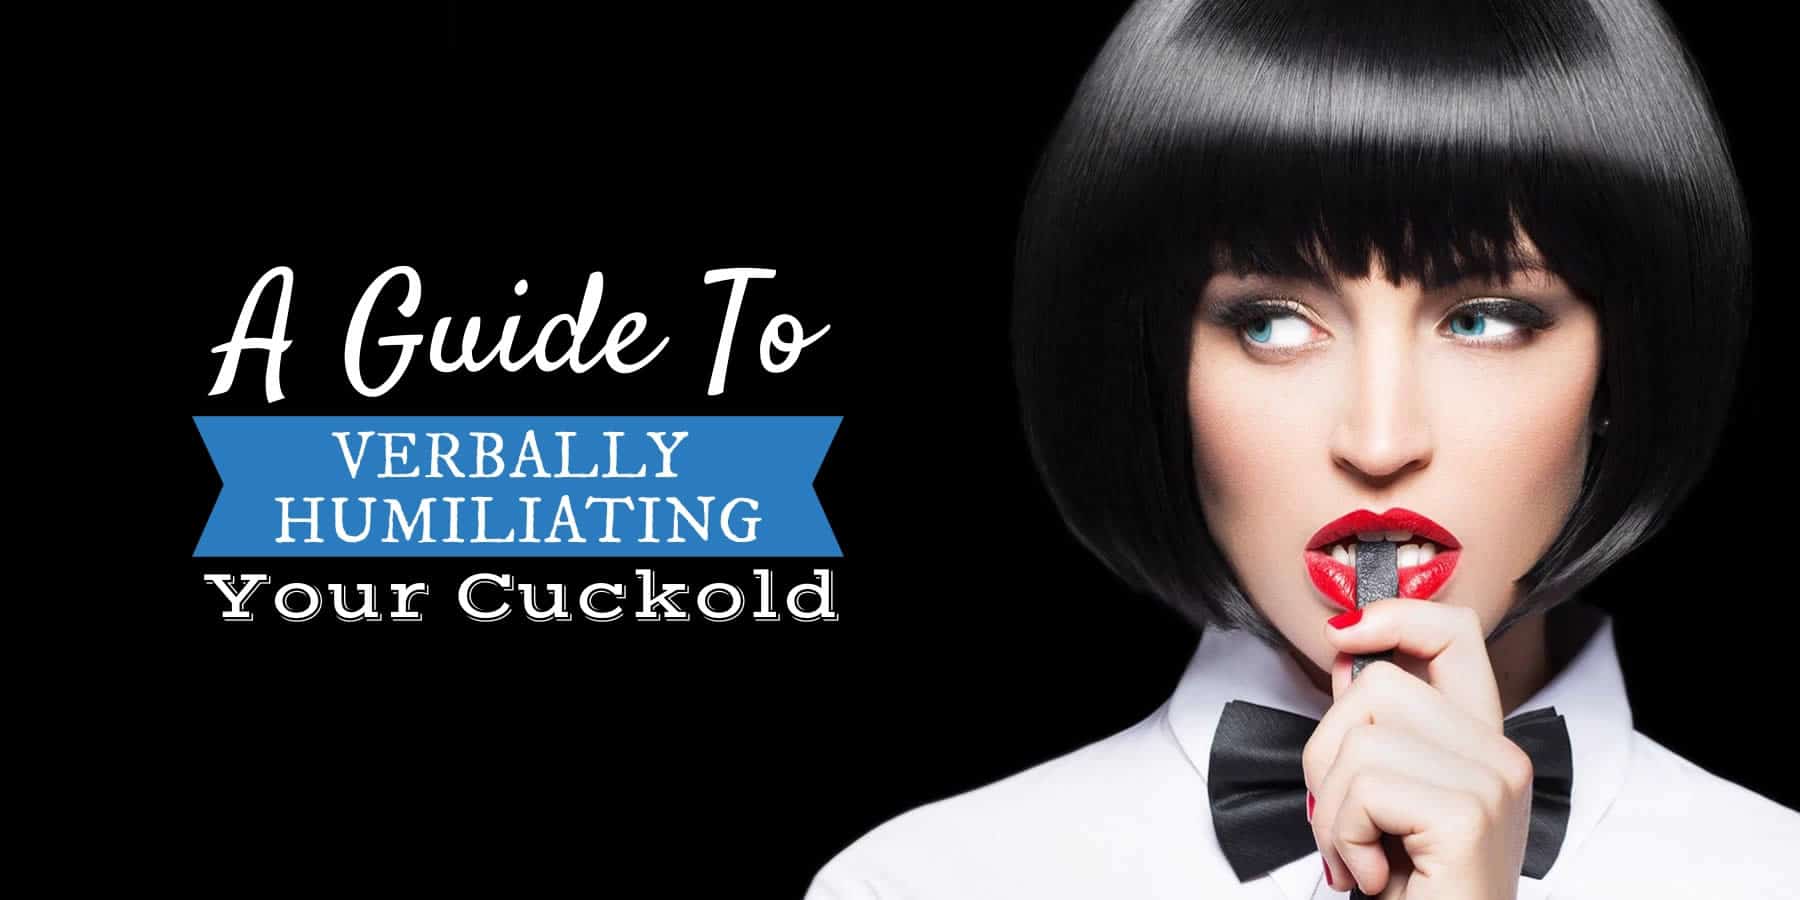 A Guide to Verbally Humiliating Your Cuckold (with Examples) photo